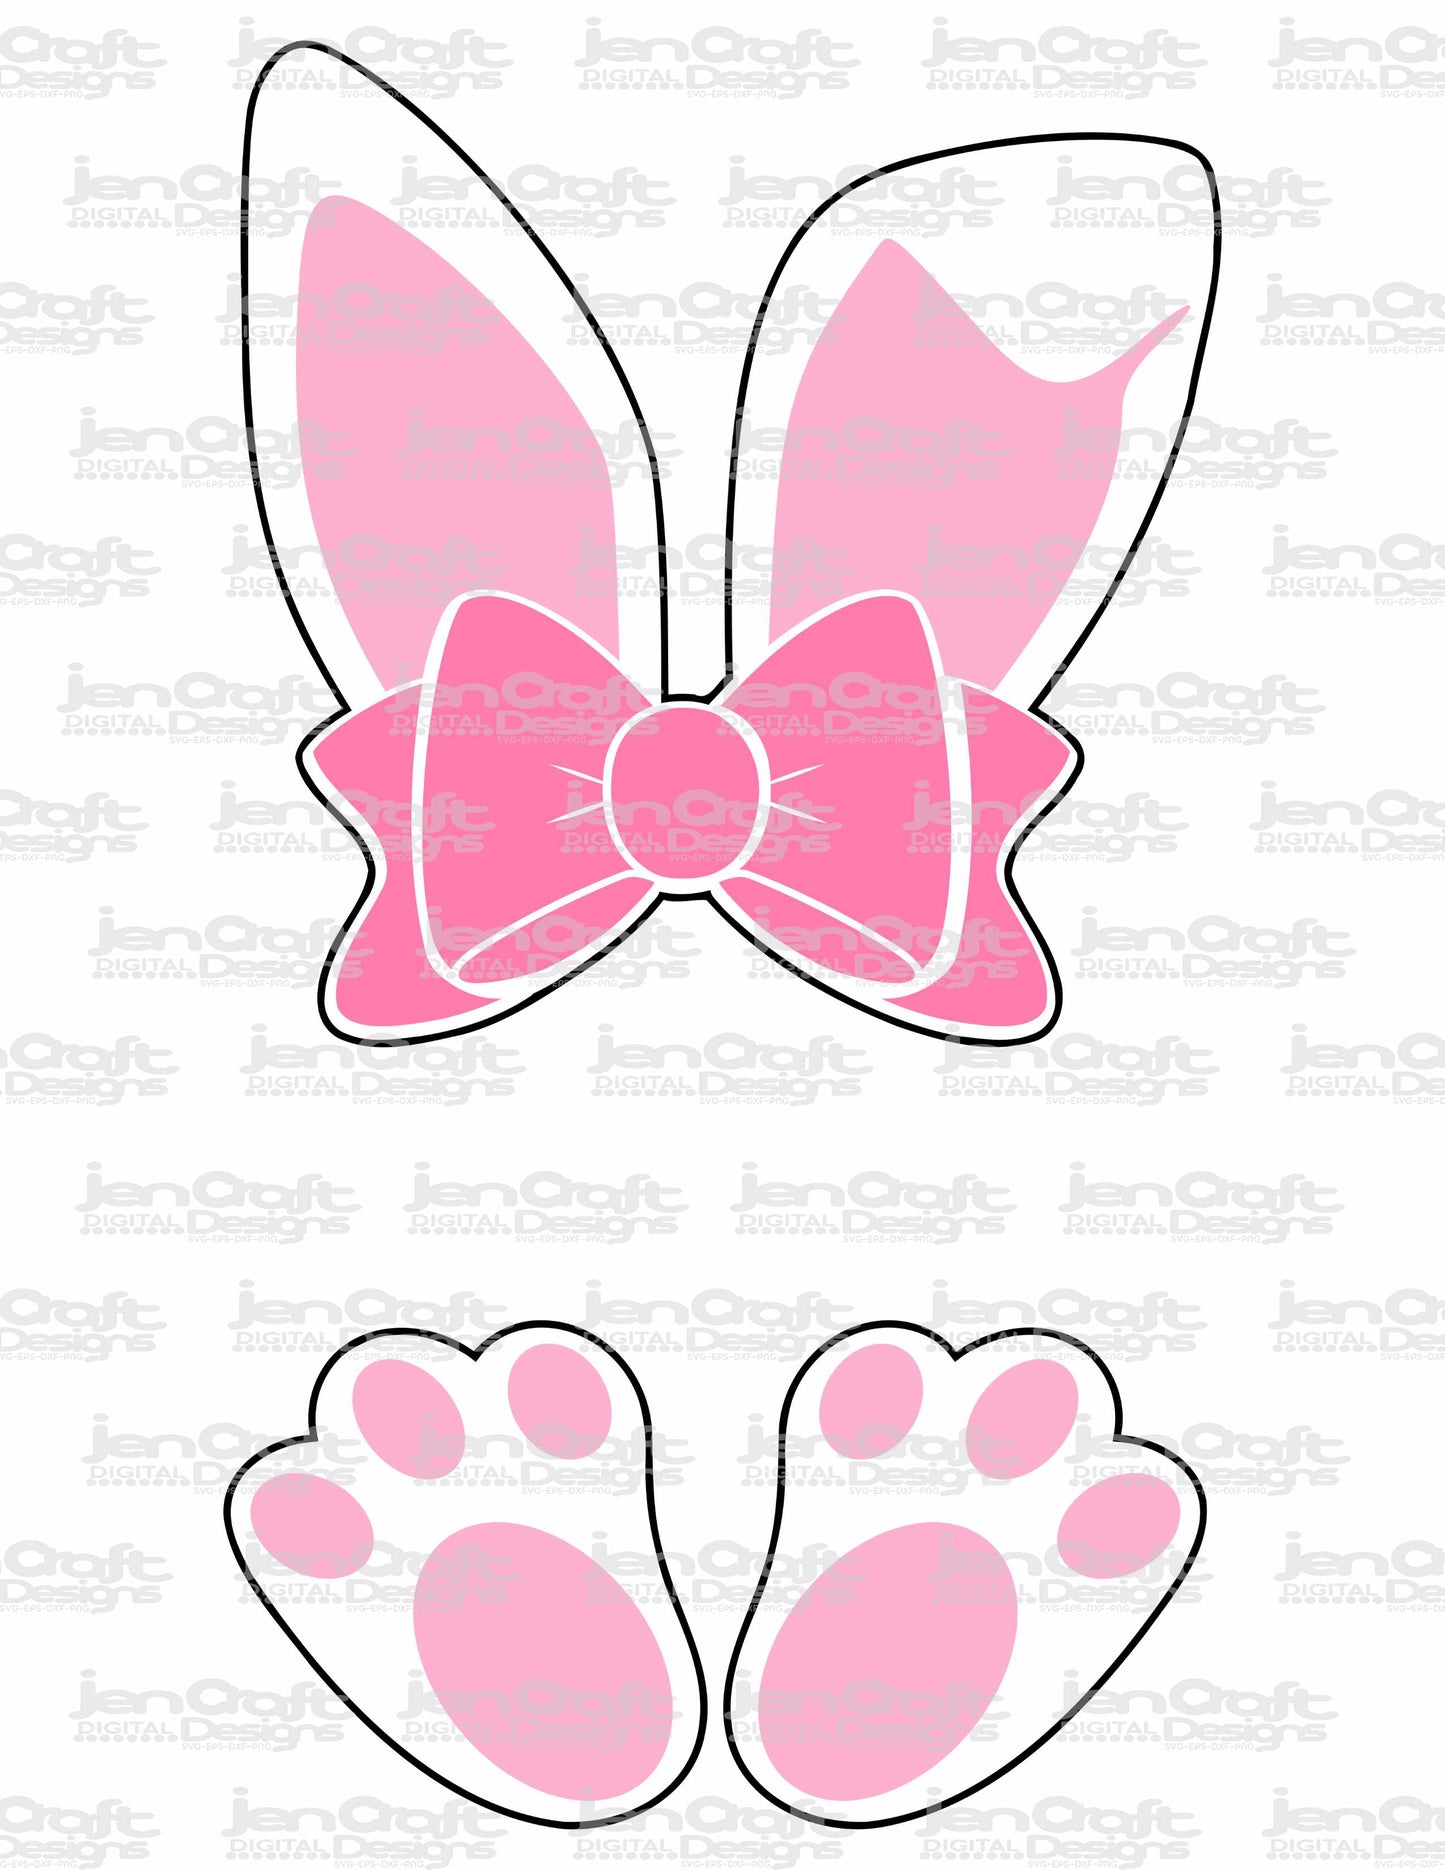 Easter Bunny Ears SVG, EPS, DXF and PNG - JenCraft Designs